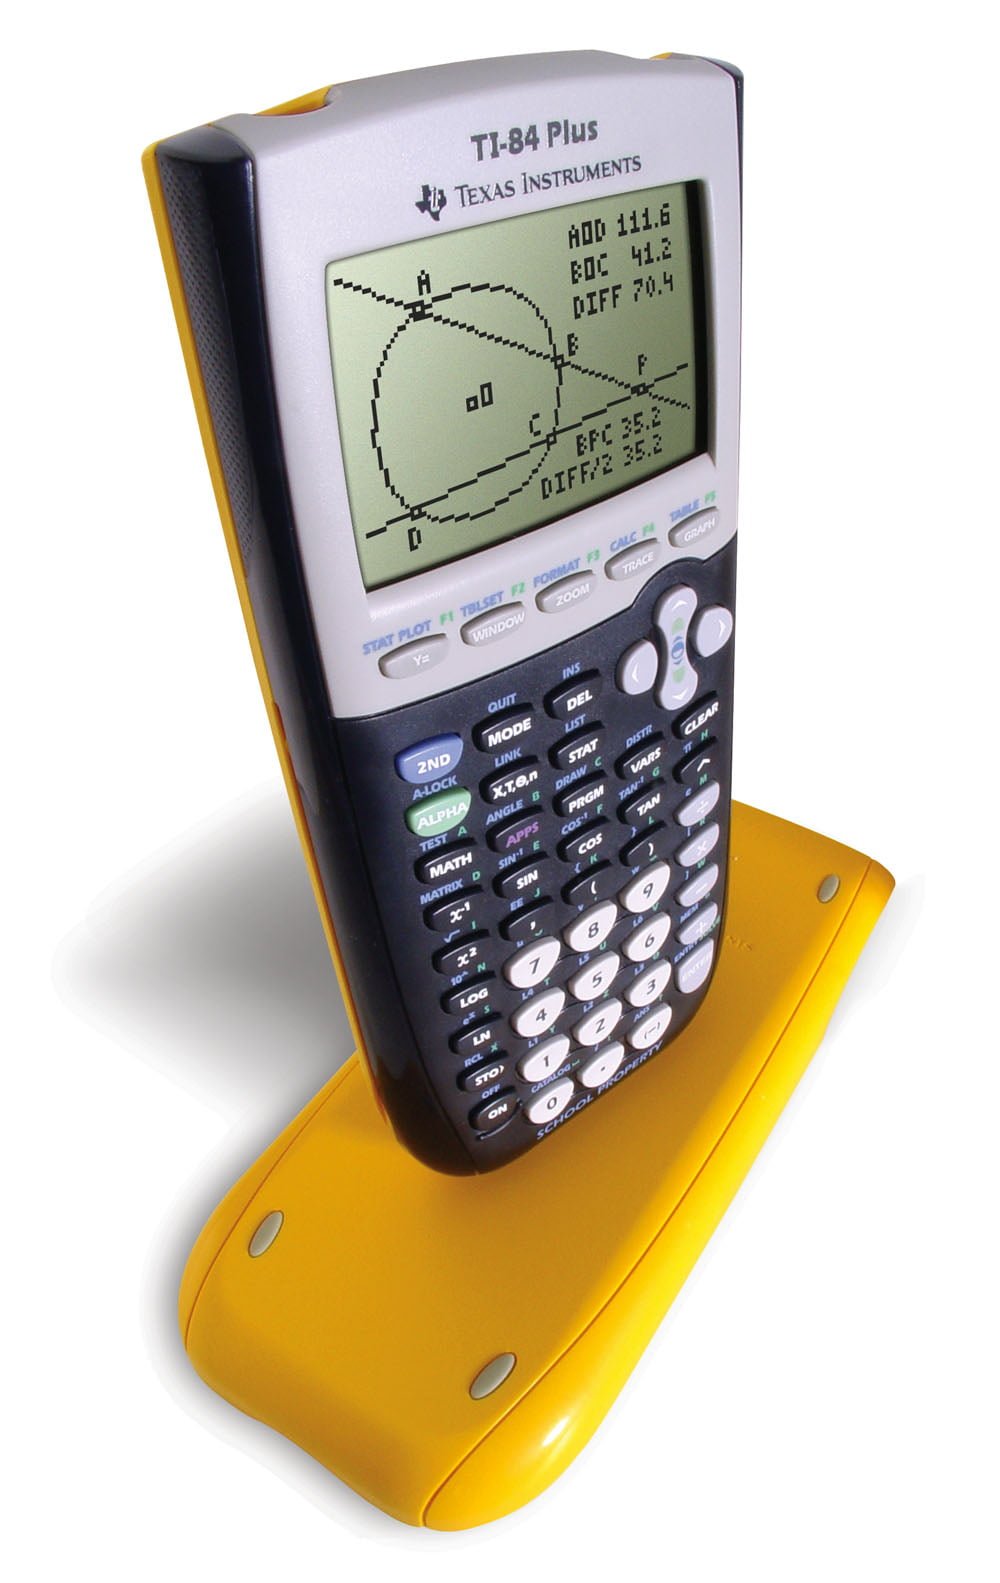 bruger Ubestemt Silicon Texas Instruments TI 84 Plus Graphing Calculator in EZ Spot Yellow with  "School Property" printed on each unit